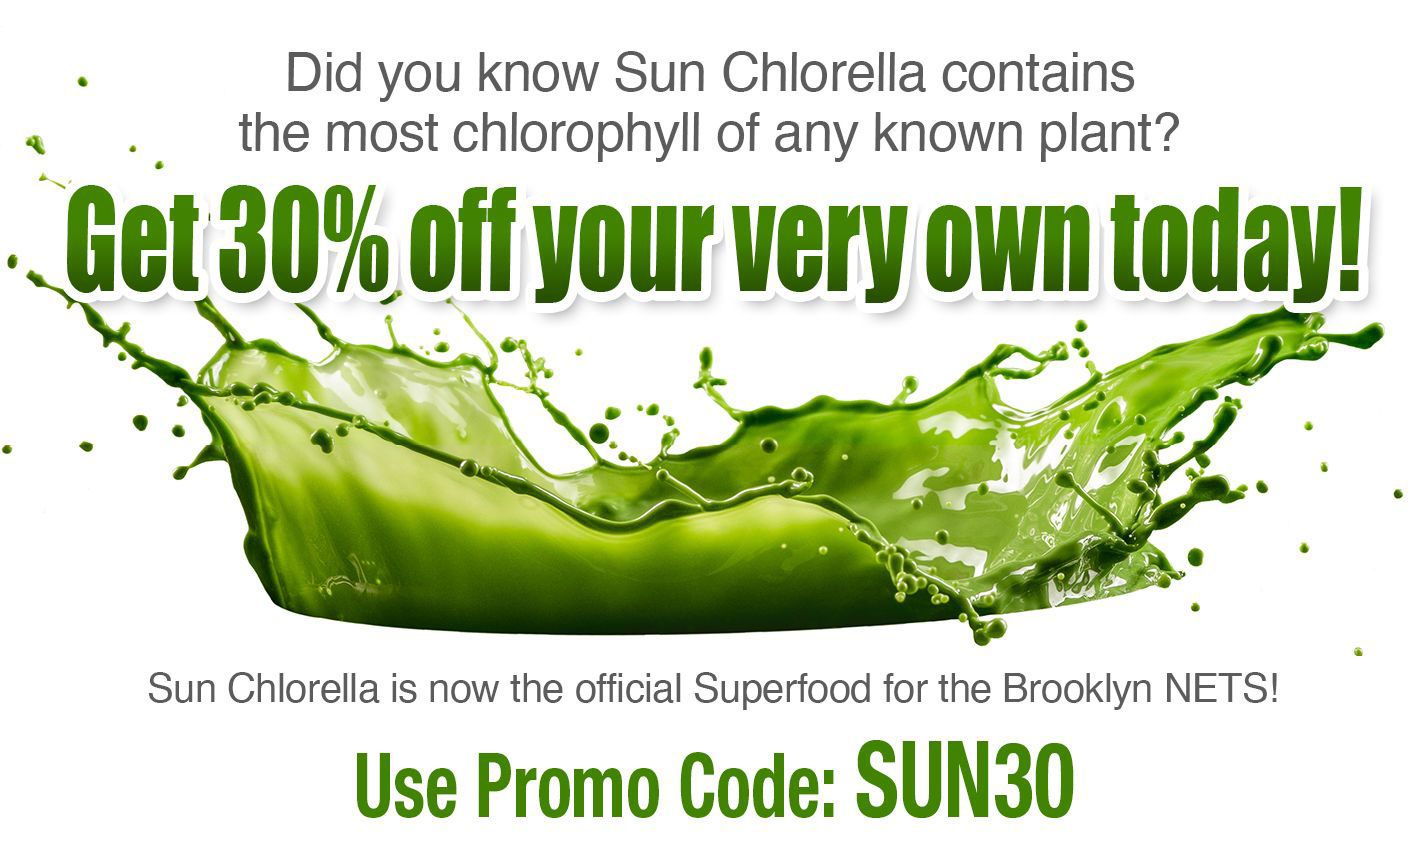 Did you know Sun Chlorella contains the most chlorophyll of any known plant?  Get 30% off your very own today! Sun Chlorella is now the official Superfood of the Brooklyn NETS!